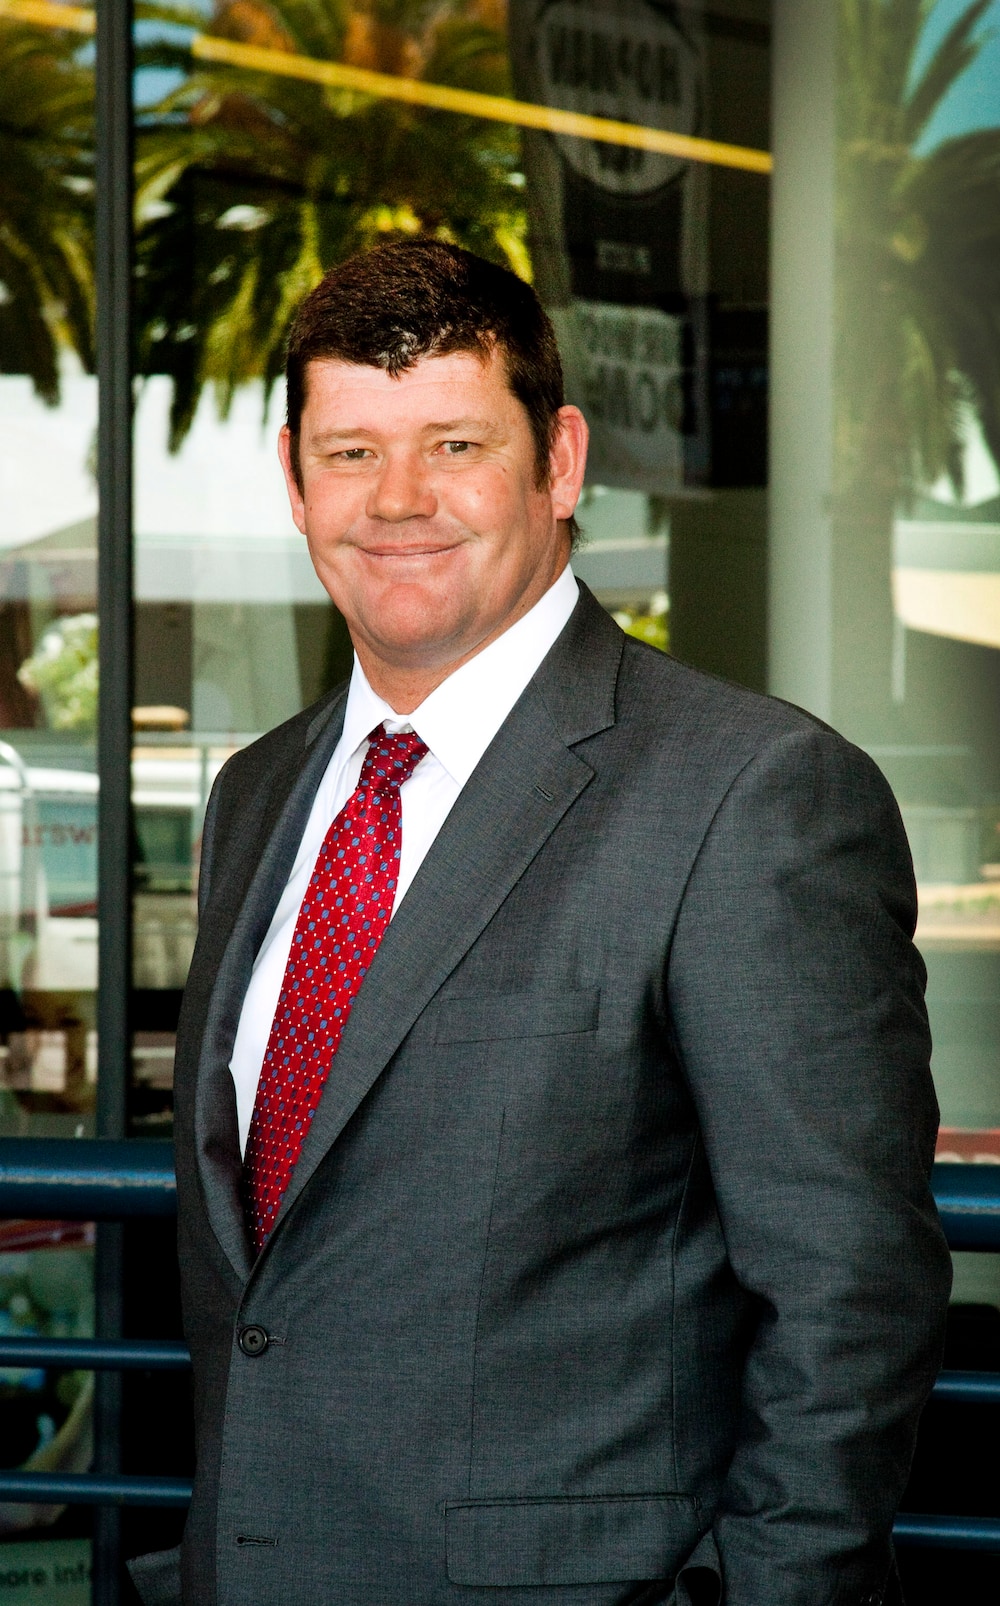 James Packer: age, children, wife, height, businesses, profiles, net worth